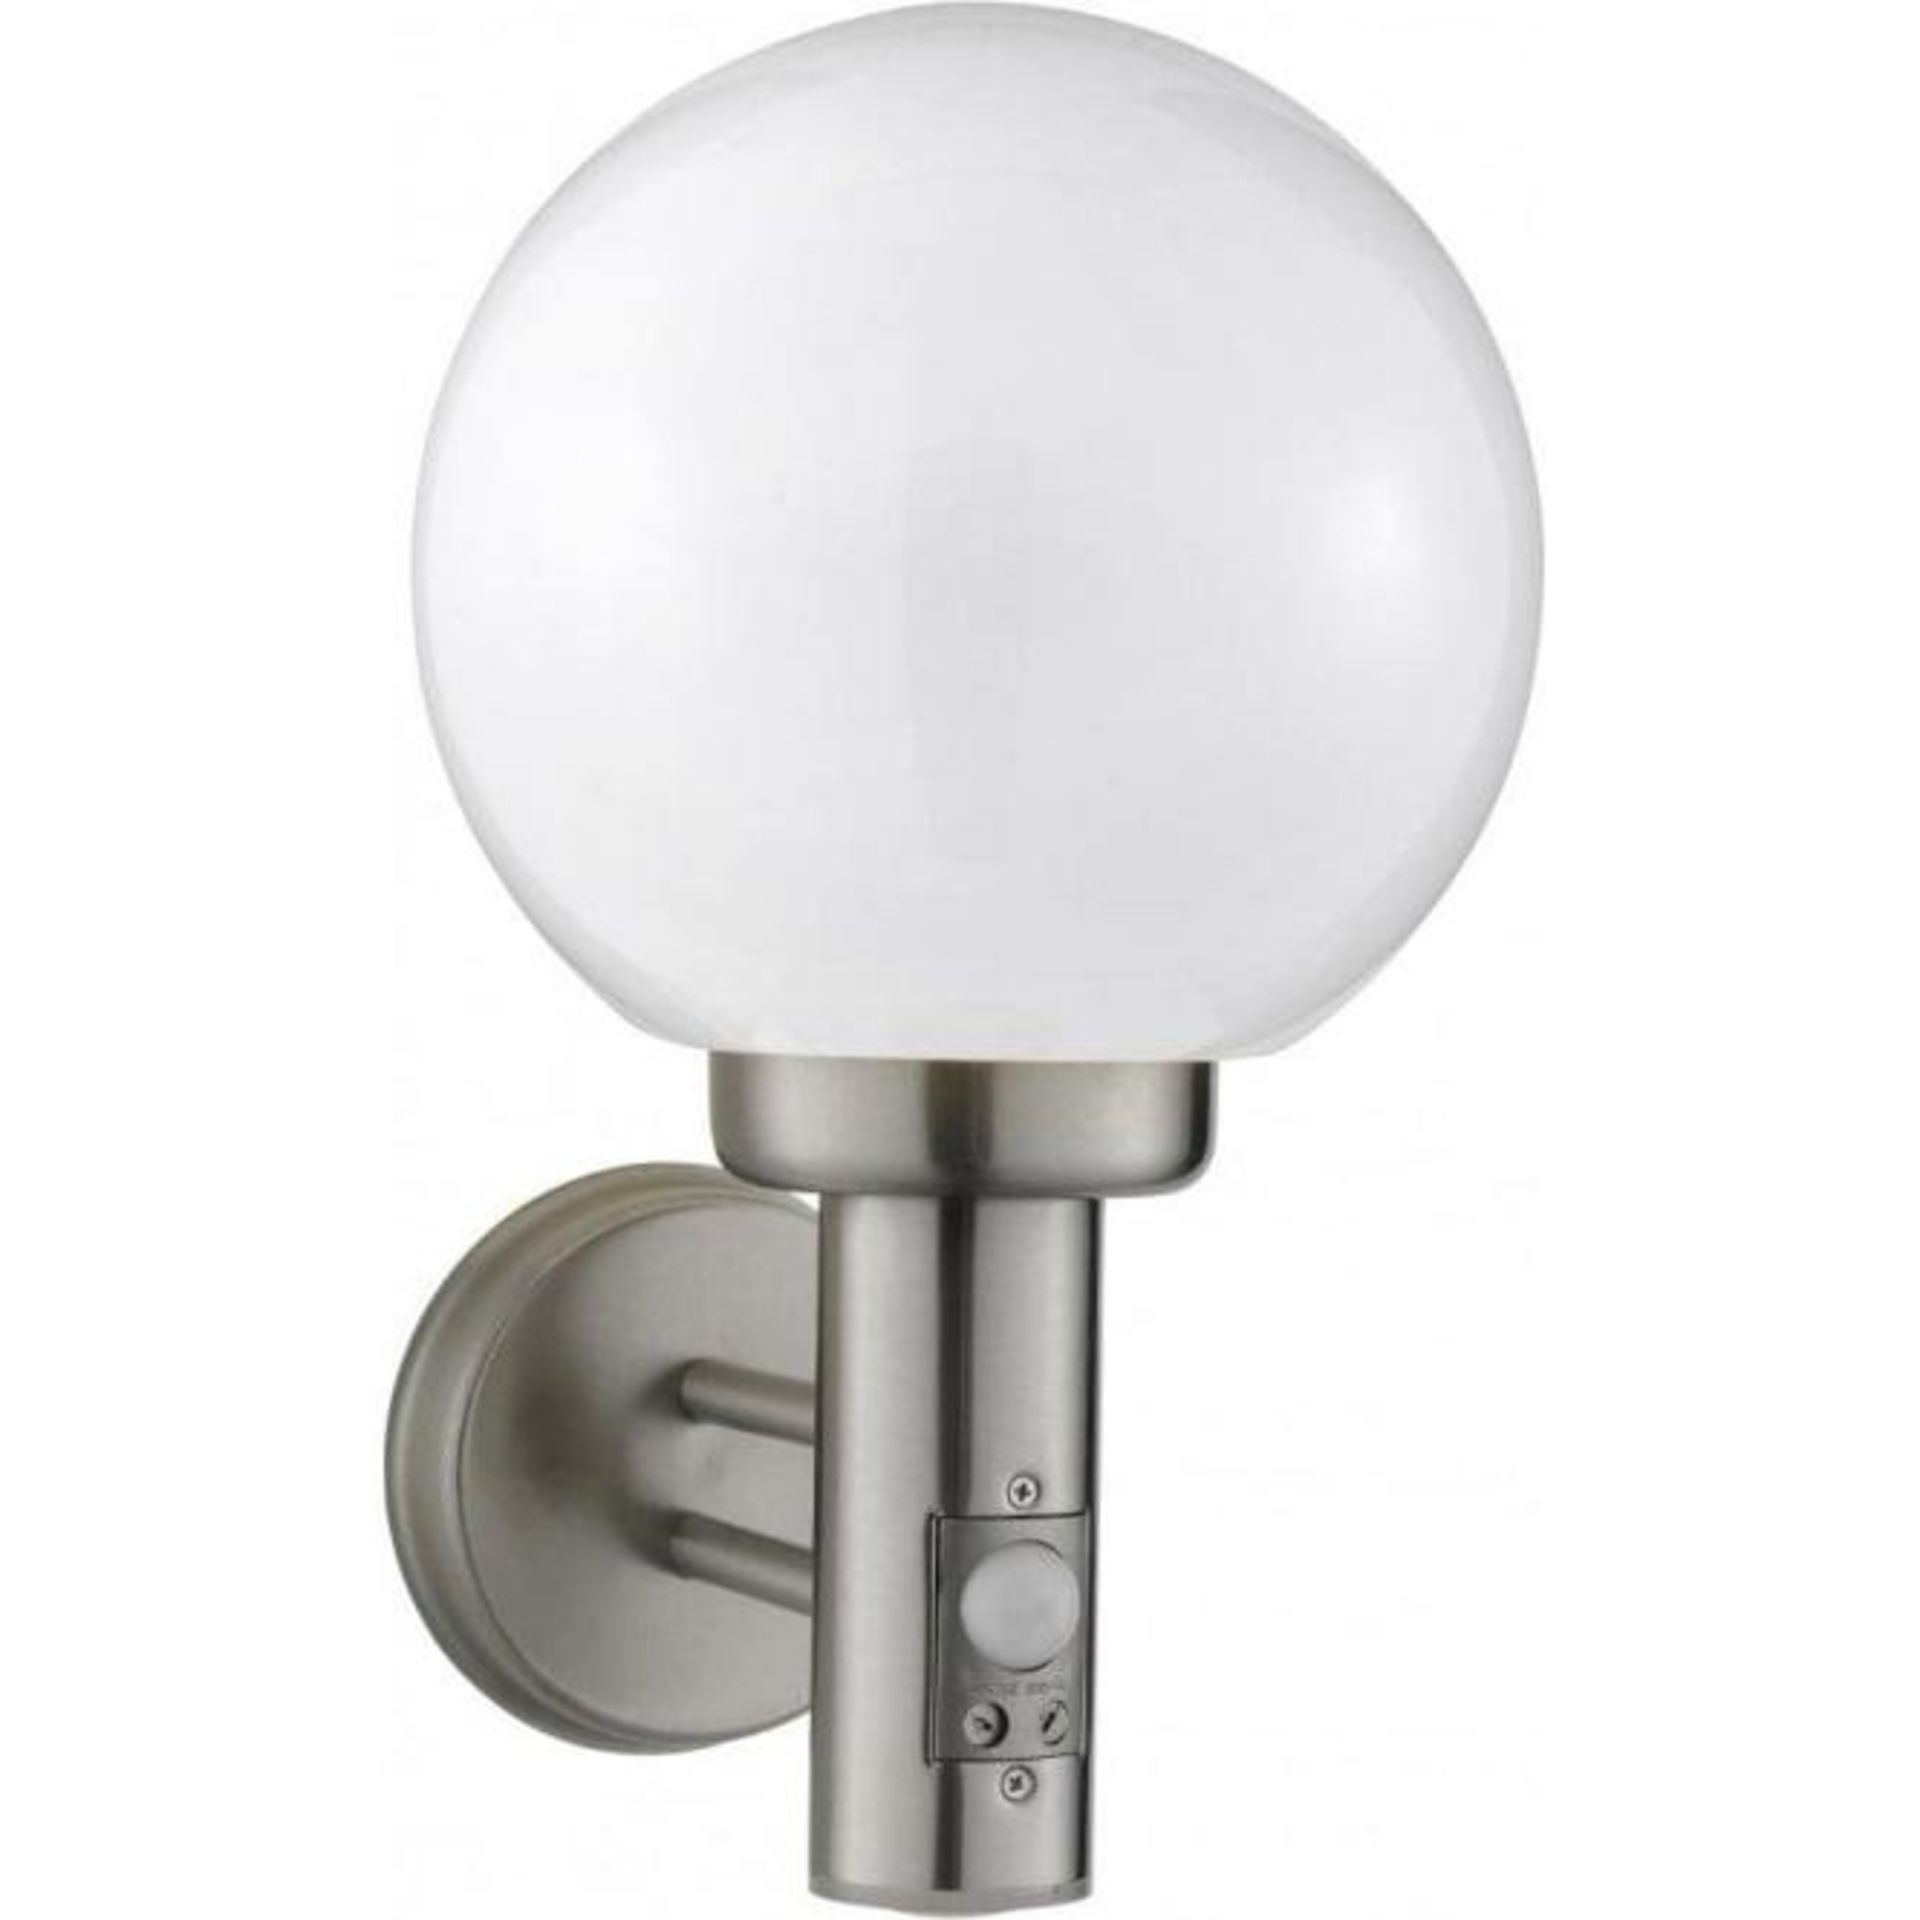 2 x Globe Outdoor Wall Light With PIR Motion Sensor - Stainless Steel With Polycarbonate Shade - IP4 - Bild 4 aus 5